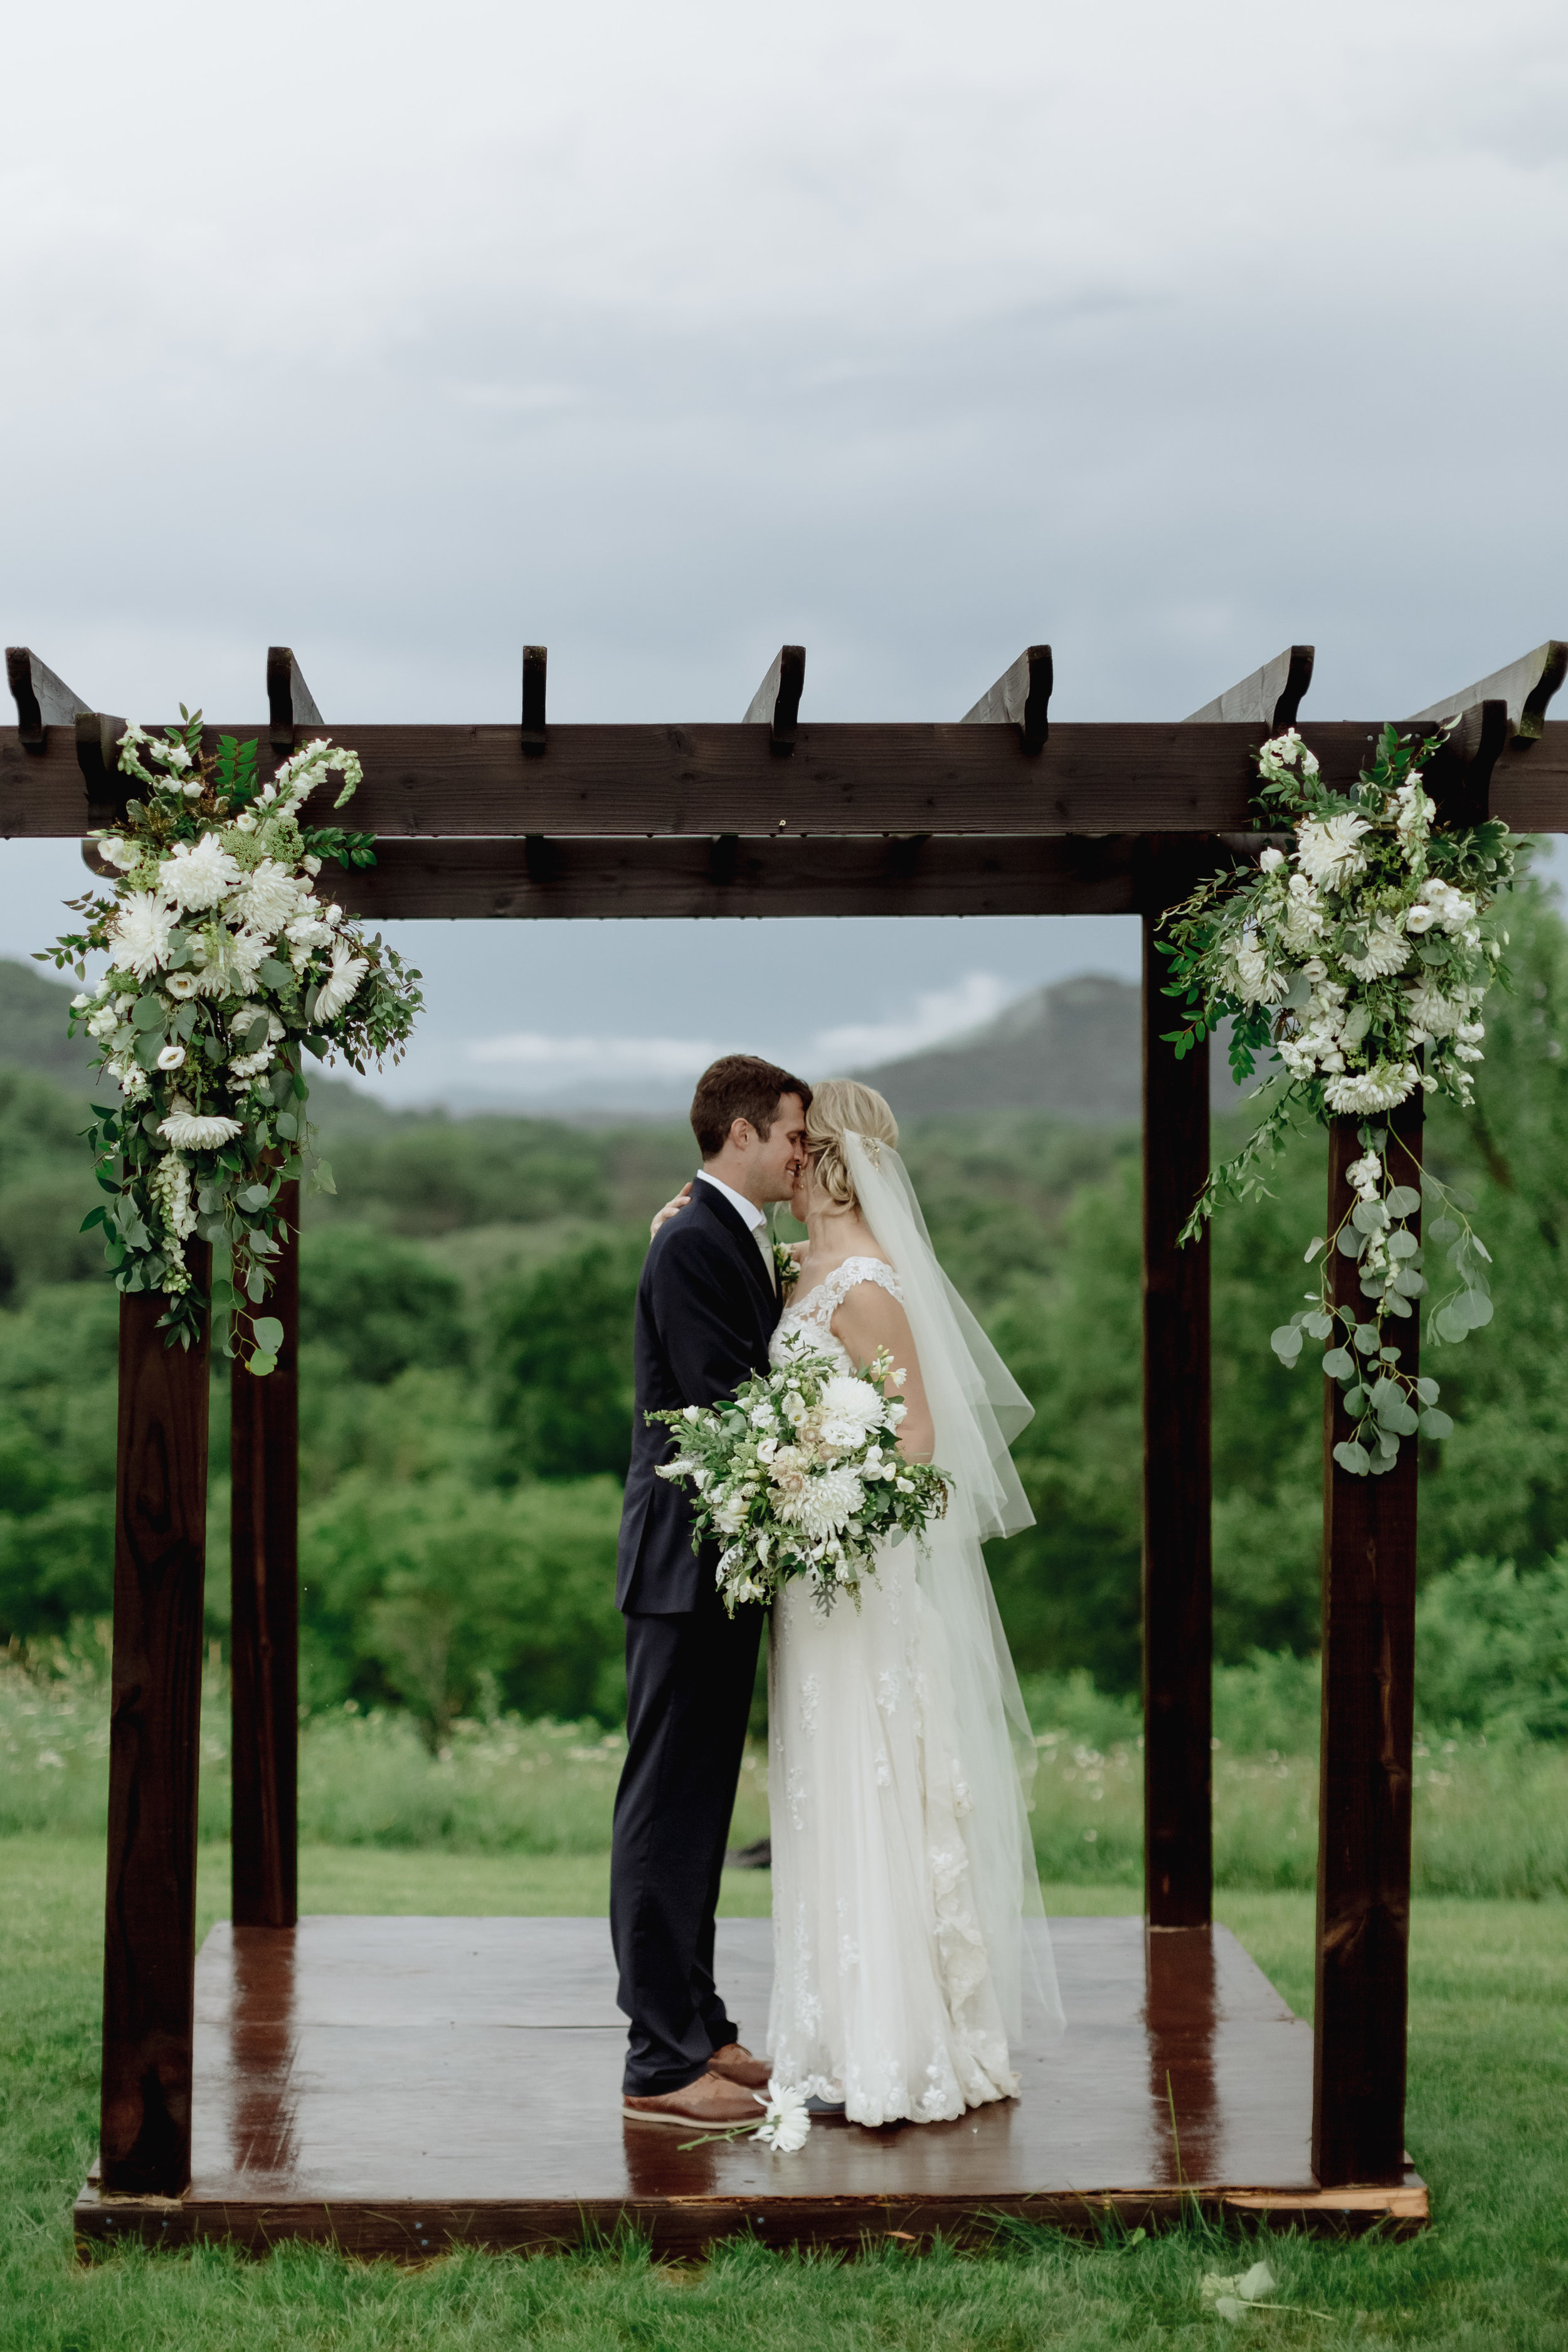 Thankfully the storms subsided post-ceremony long enough for them to get some beautiful hilltop photos (those poor arch flowers took a beating in the rain!).